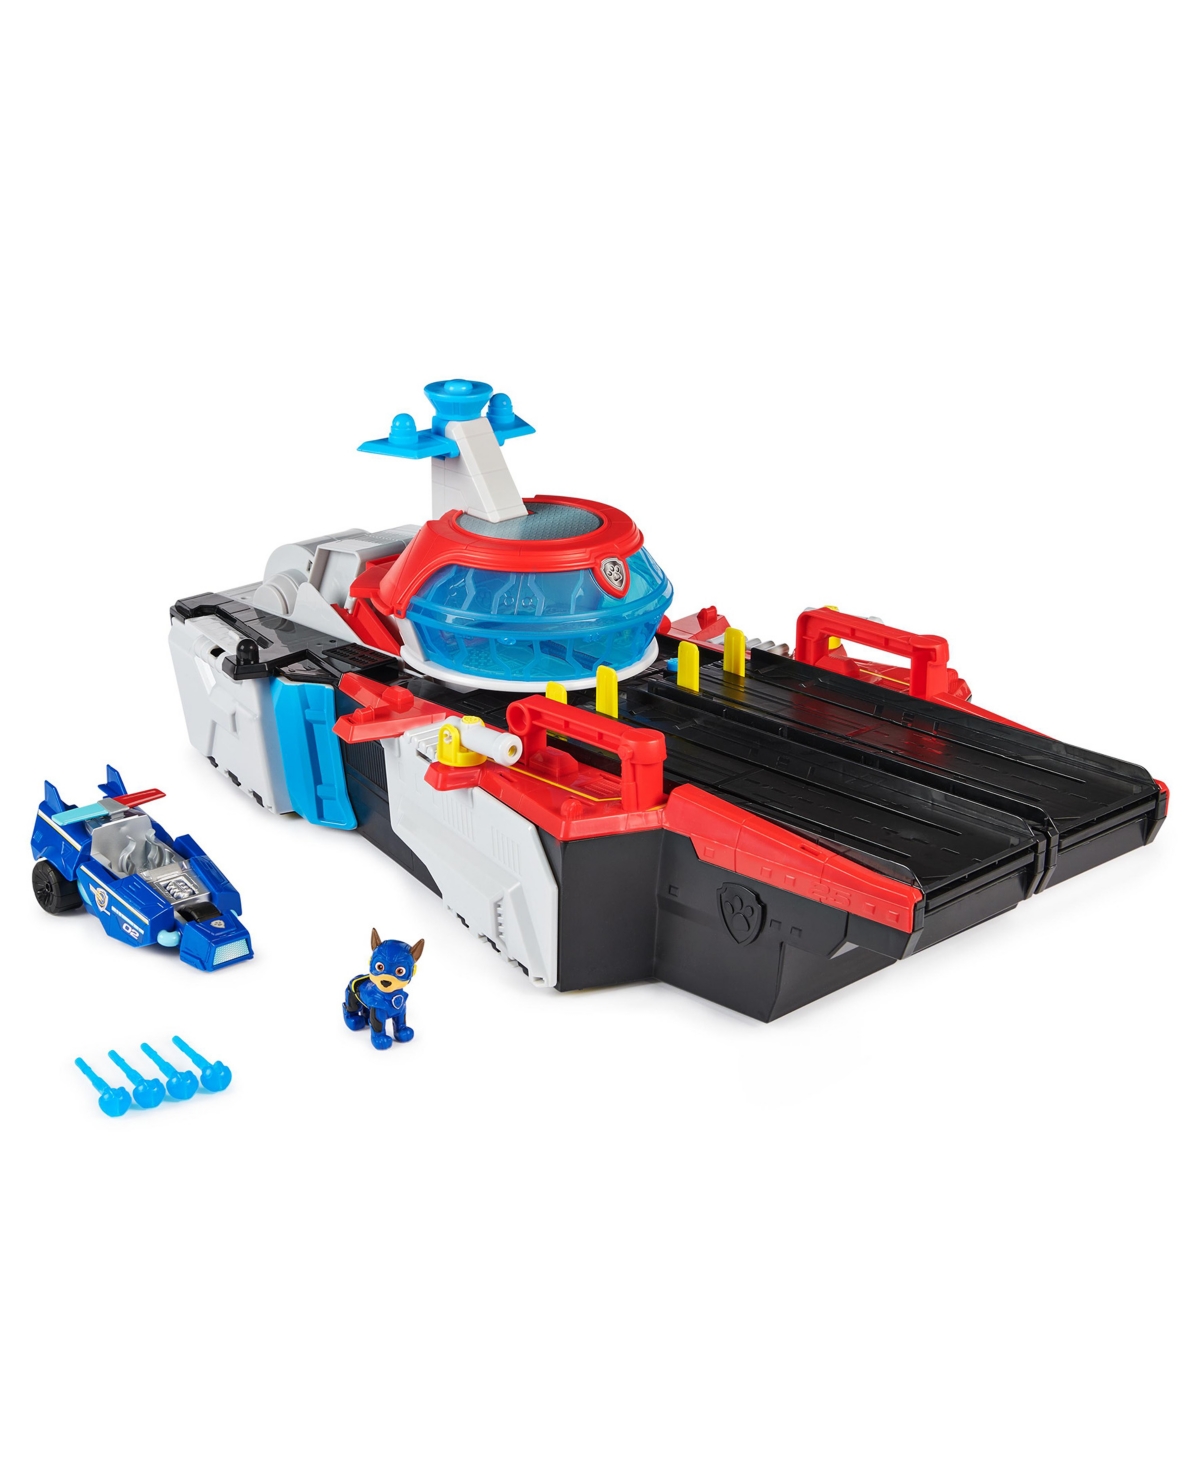 PAW PATROL - THE MIGHTY MOVIE, AIRCRAFT CARRIER HQ, WITH CHASE ACTION FIGURE AND MIGHTY PUPS CRUISER, KIDS TOYS